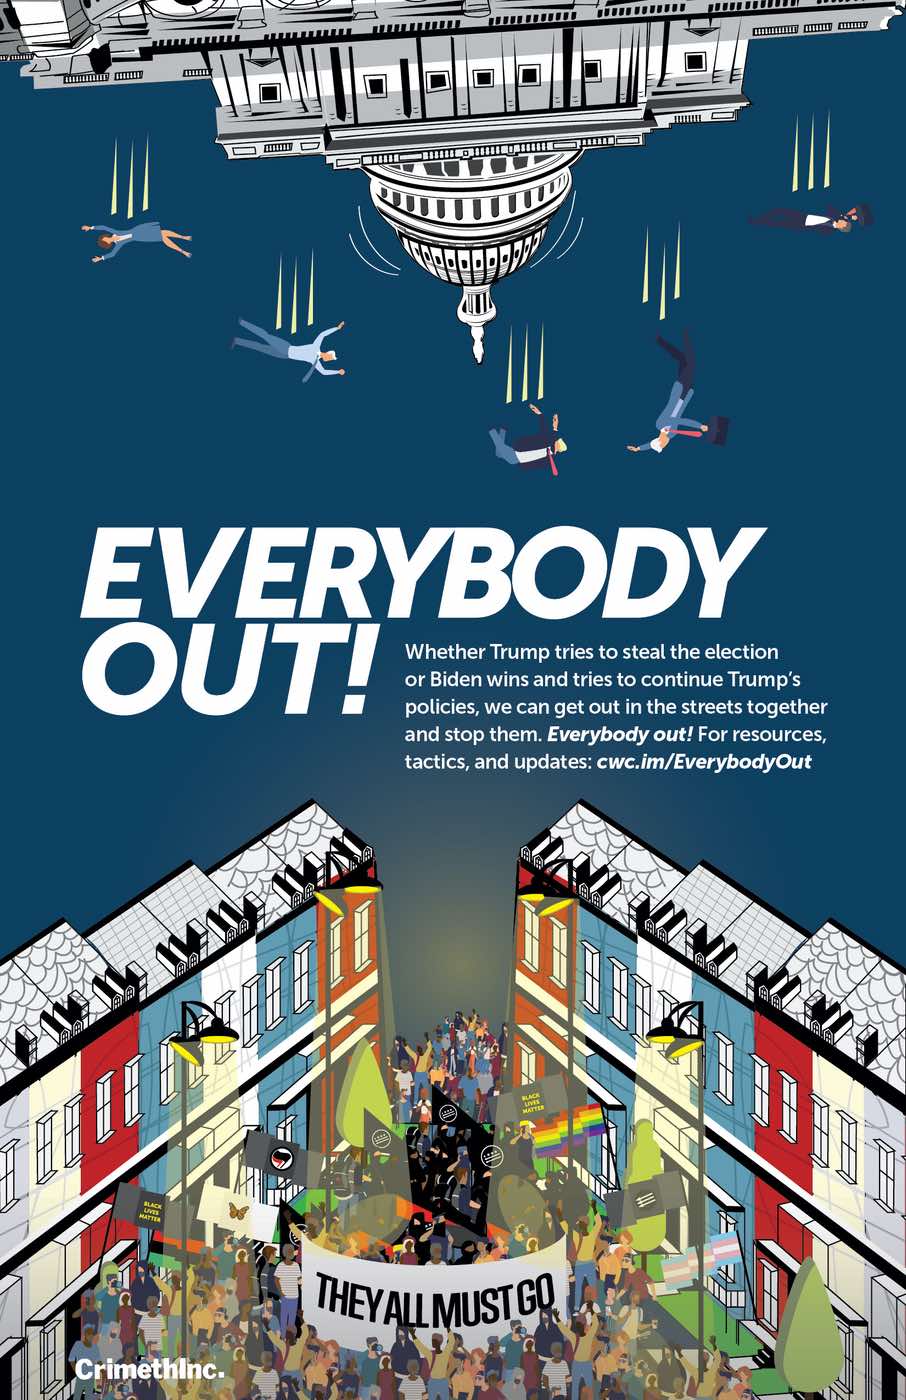 Photo of ‘Everybody Out!’ front side